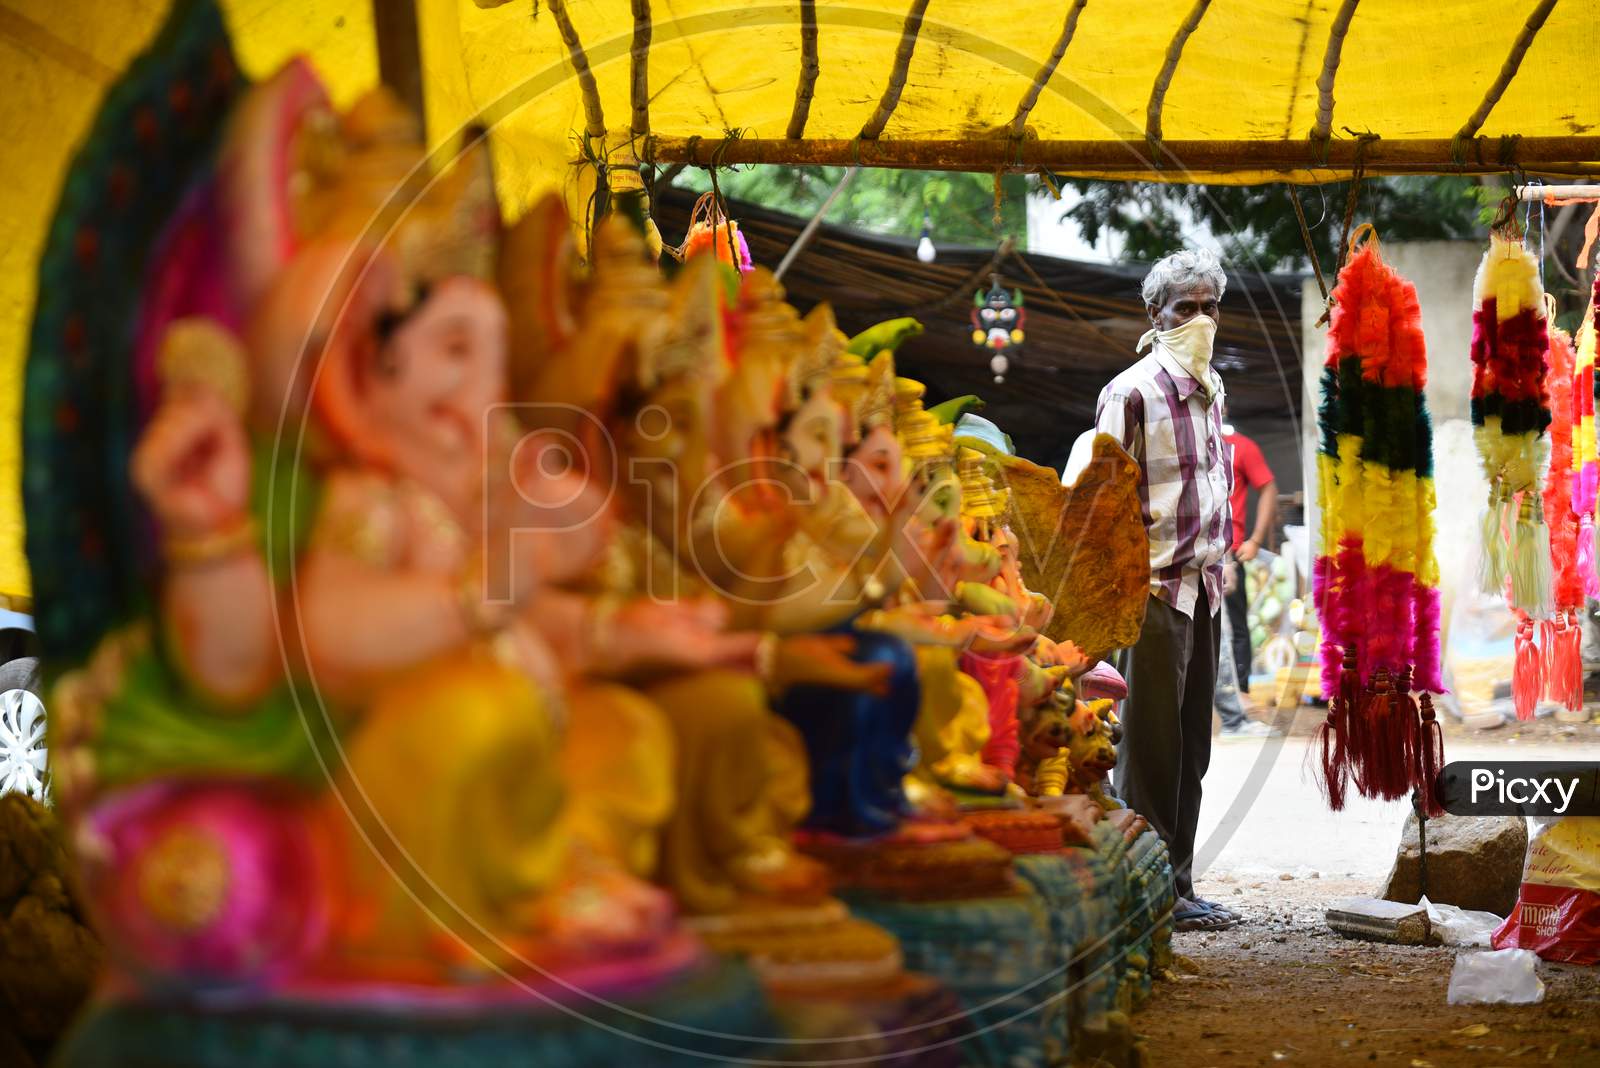 A seller waits for customers of Idols ahead of Ganesh chaturthi in hyderabad, august 21, 2020.